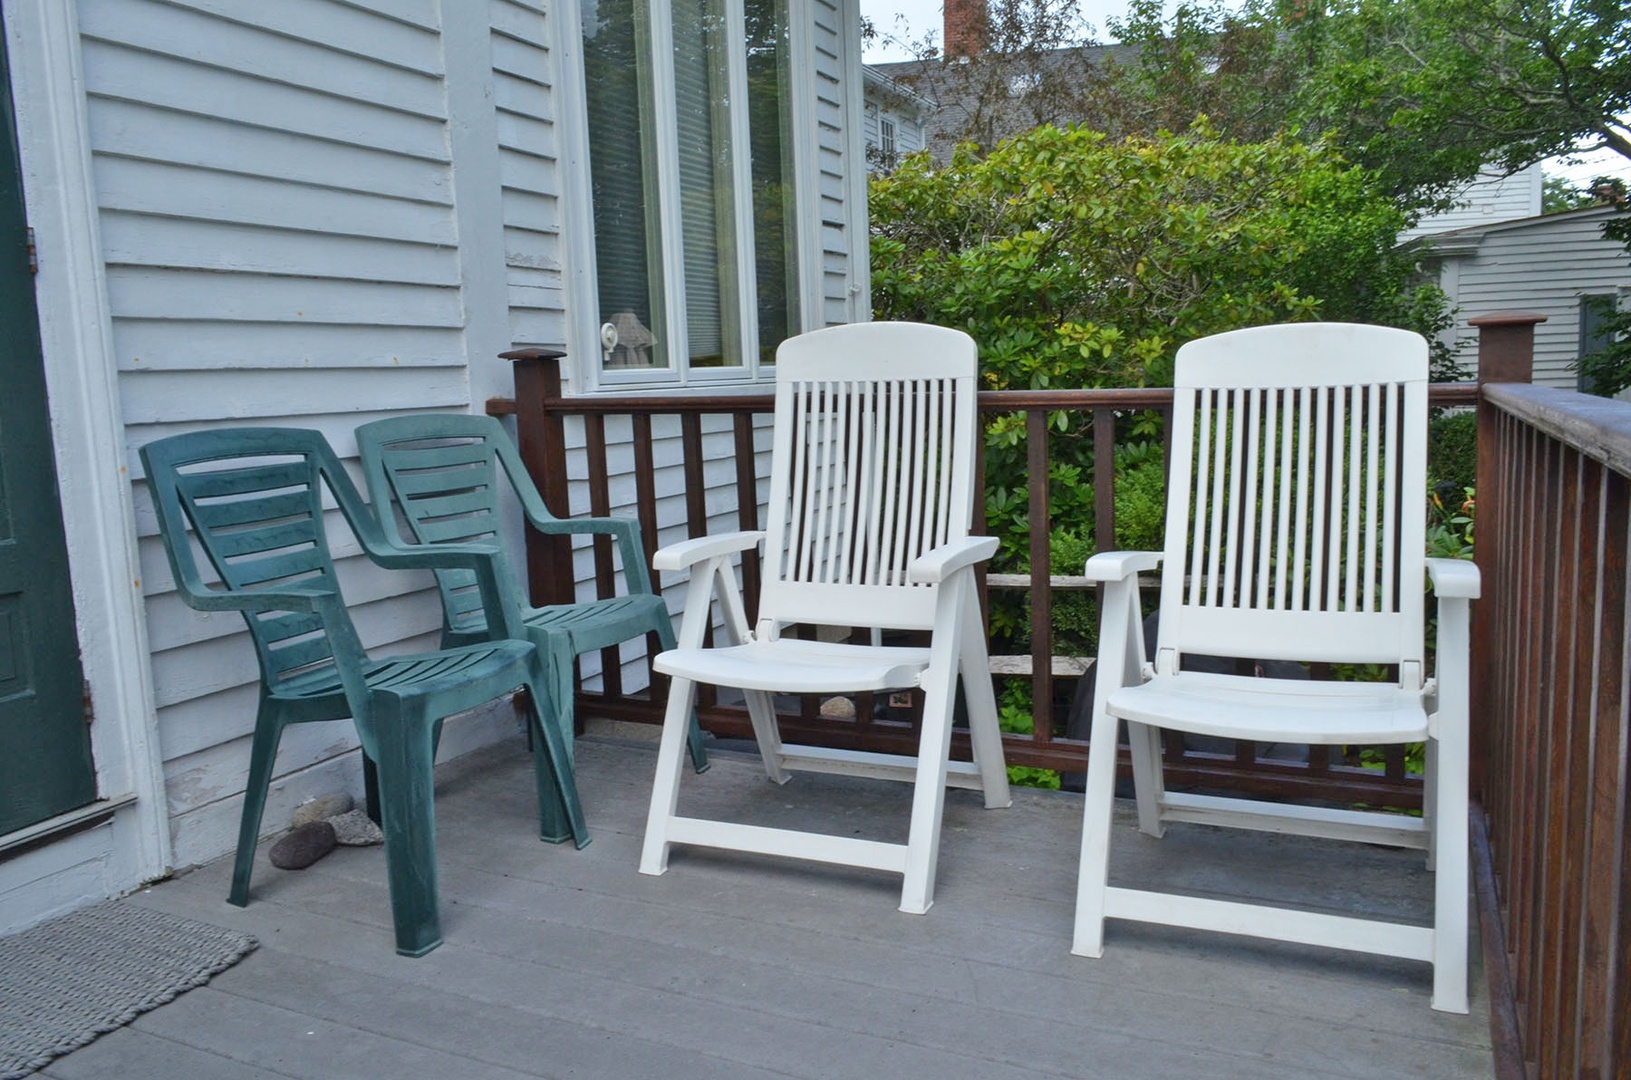 Outdoor seating on the back deck.